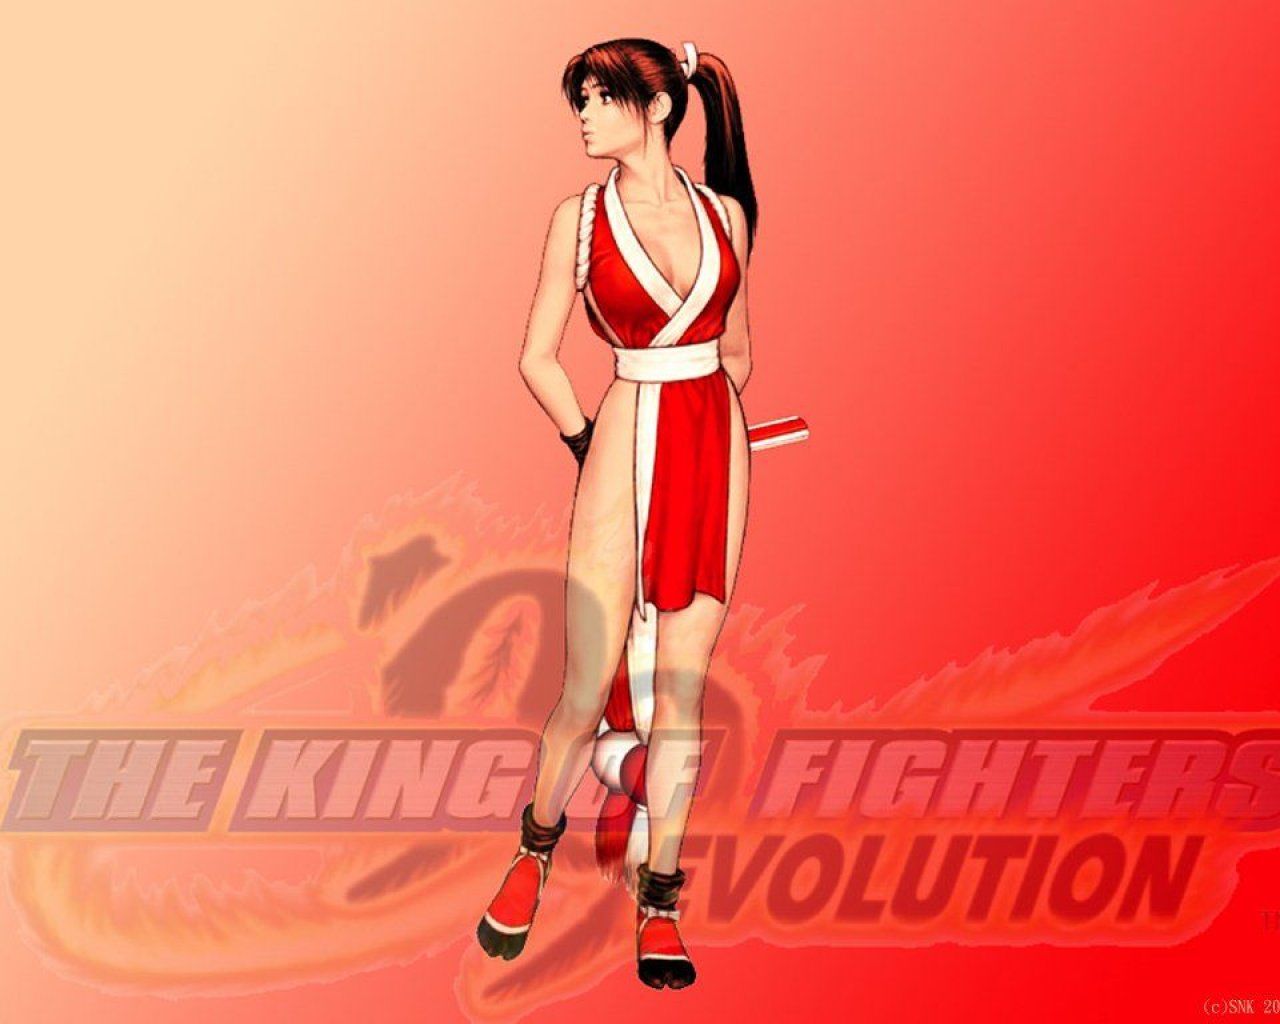 King of Fighters Wallpaper King of Fighters Wallpaper of Fighters Desktop Wallpaper in High Resolution Kingdom Hearts Insider